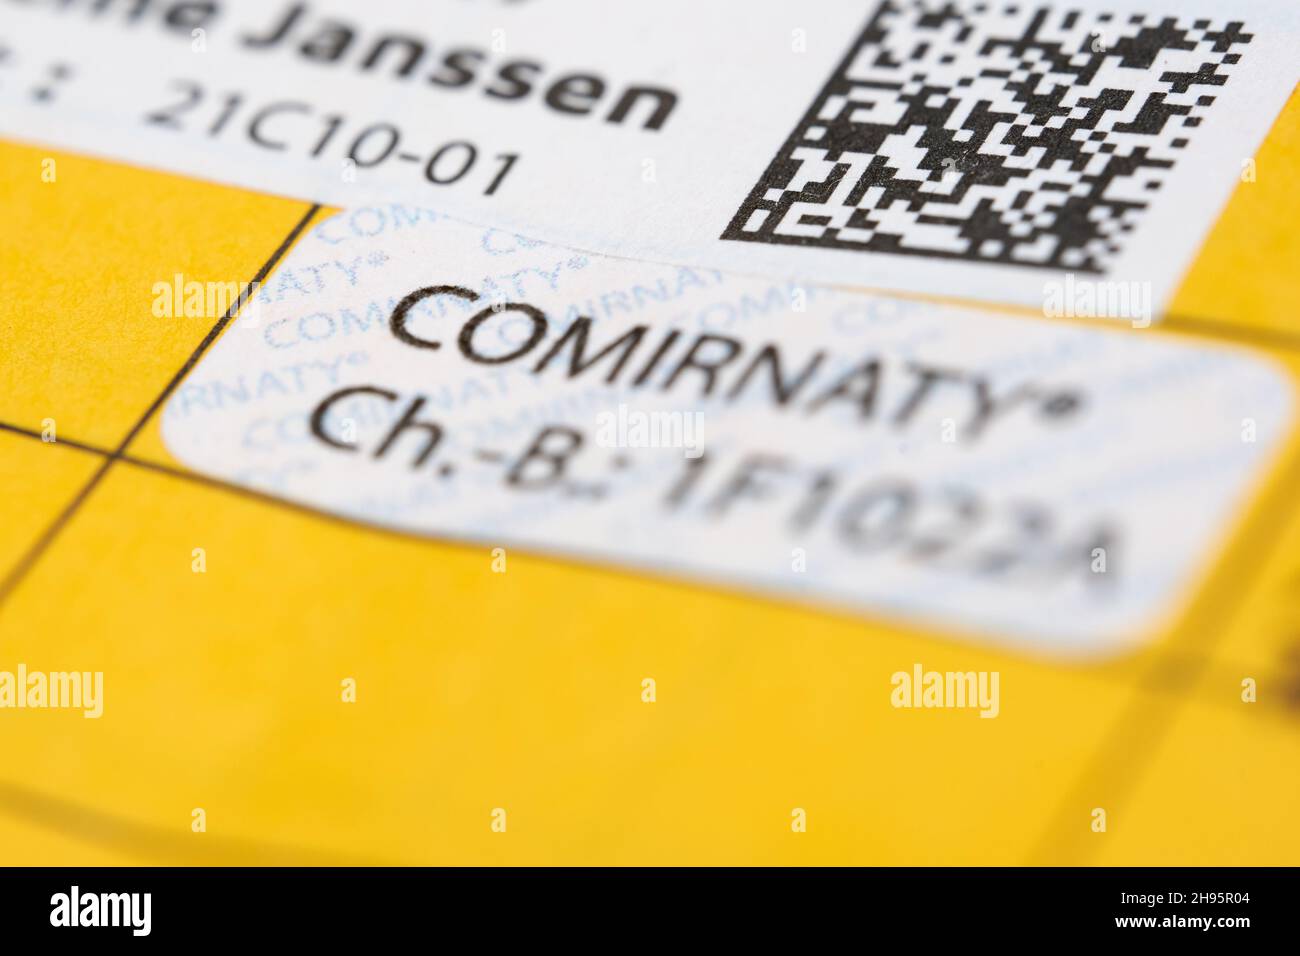 Stuttgart, Germany - December - 04, 2021: Booster vaccination against Corona covid-19 virus. Yellow vaccination card with proof label. Vaccine from Bi Stock Photo